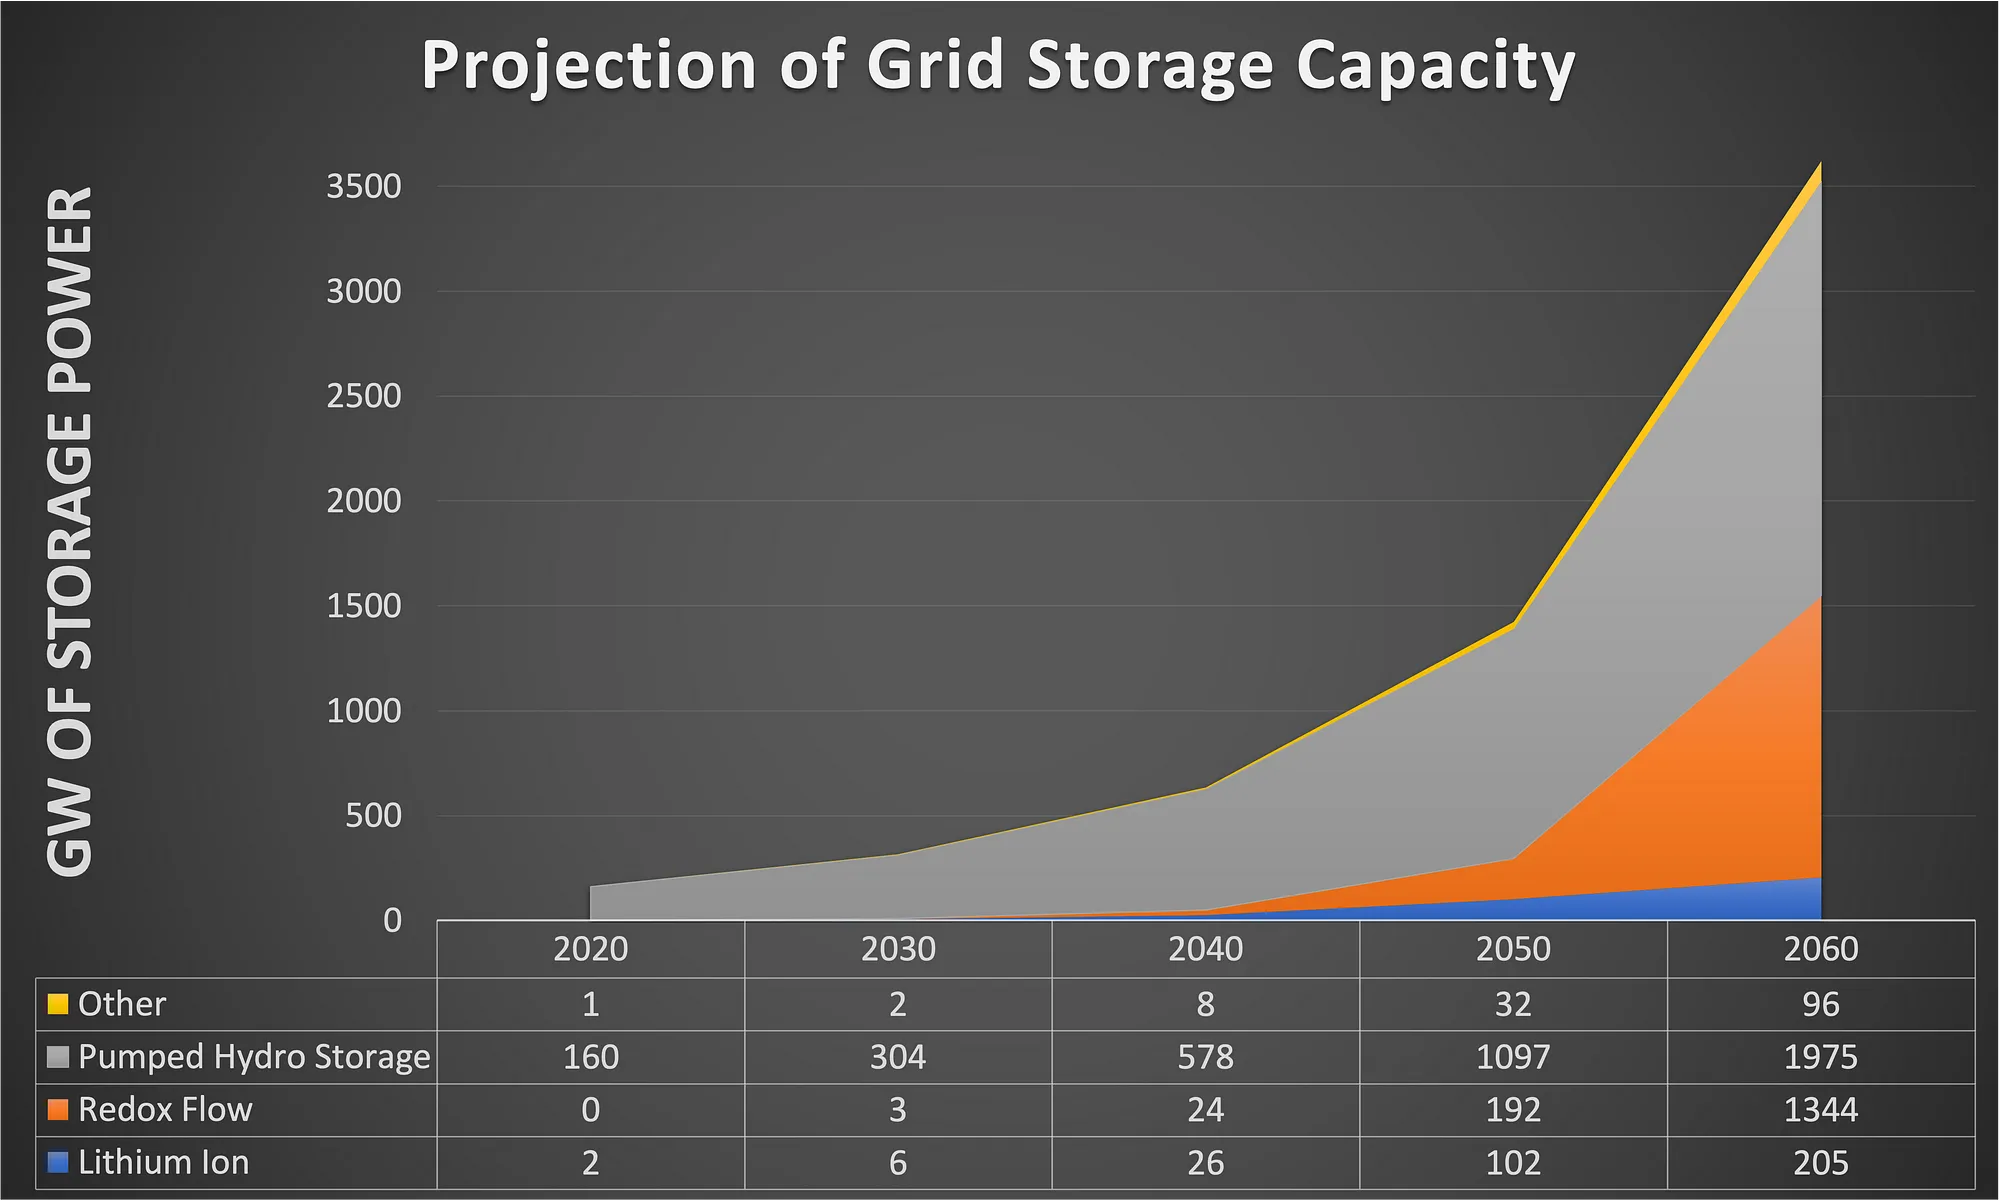 Projection of grid storage capacity through 2060 by major categories by author